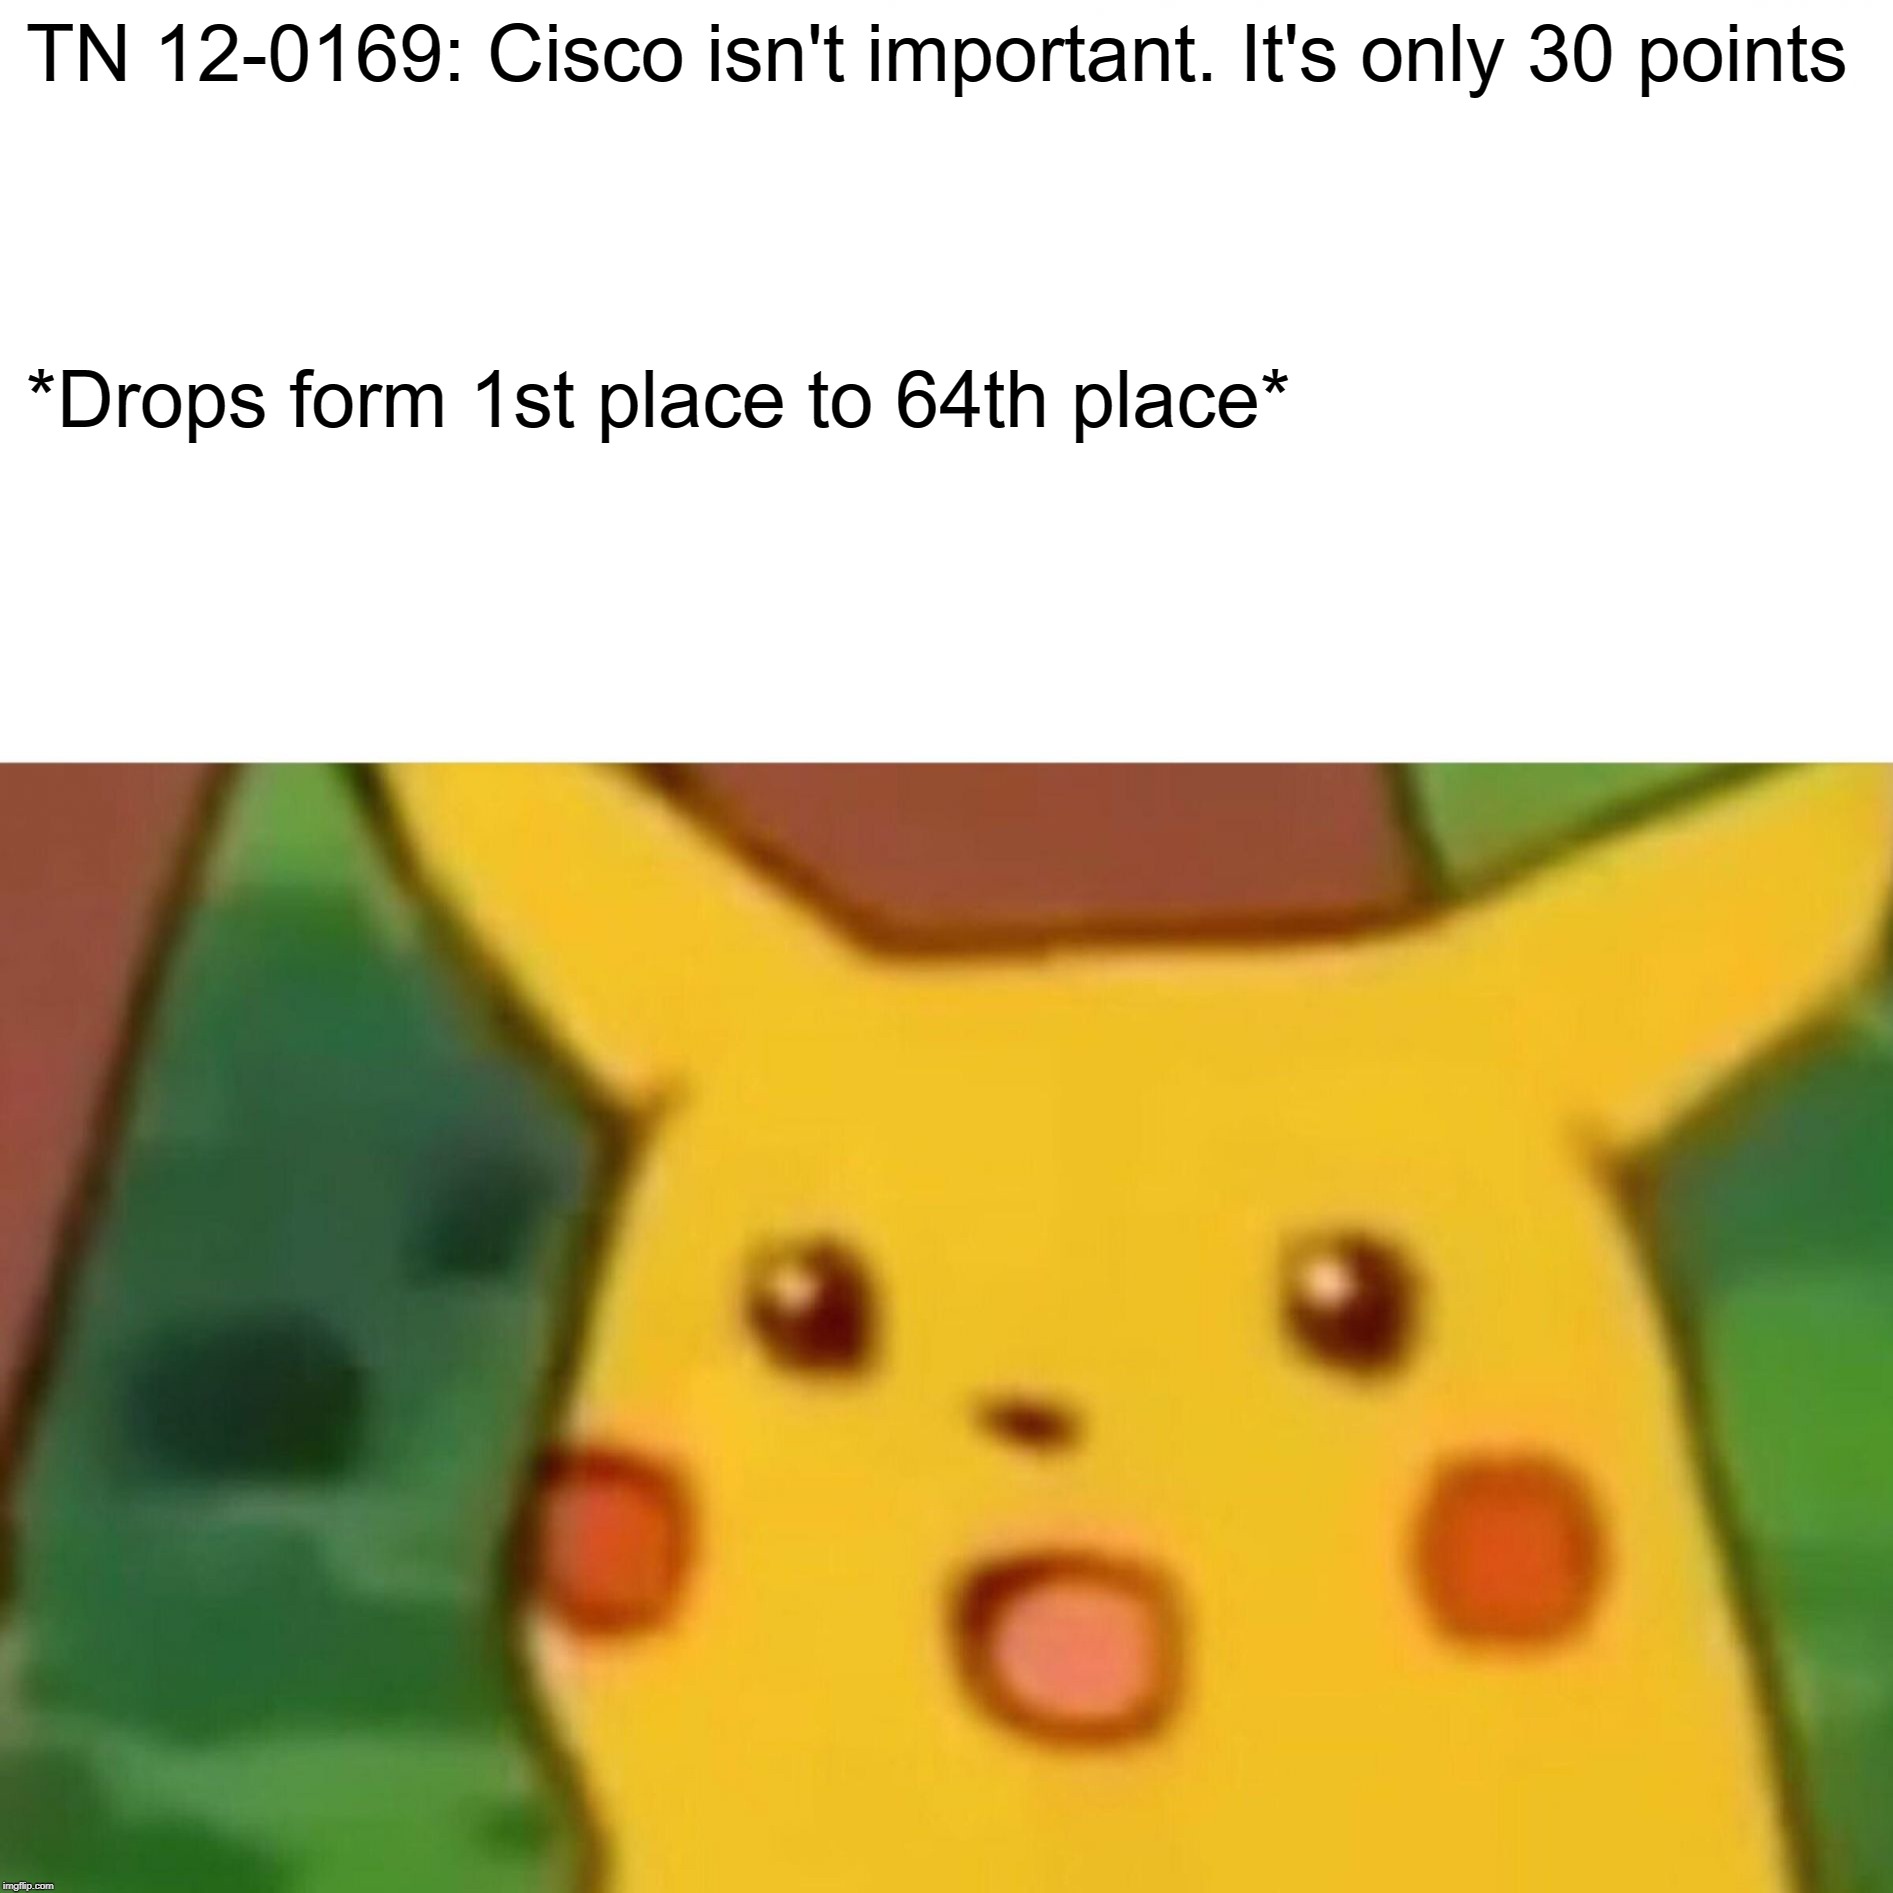 Surprised Pikachu Meme | TN 12-0169: Cisco isn't important. It's only 30 points; *Drops form 1st place to 64th place* | image tagged in memes,surprised pikachu | made w/ Imgflip meme maker